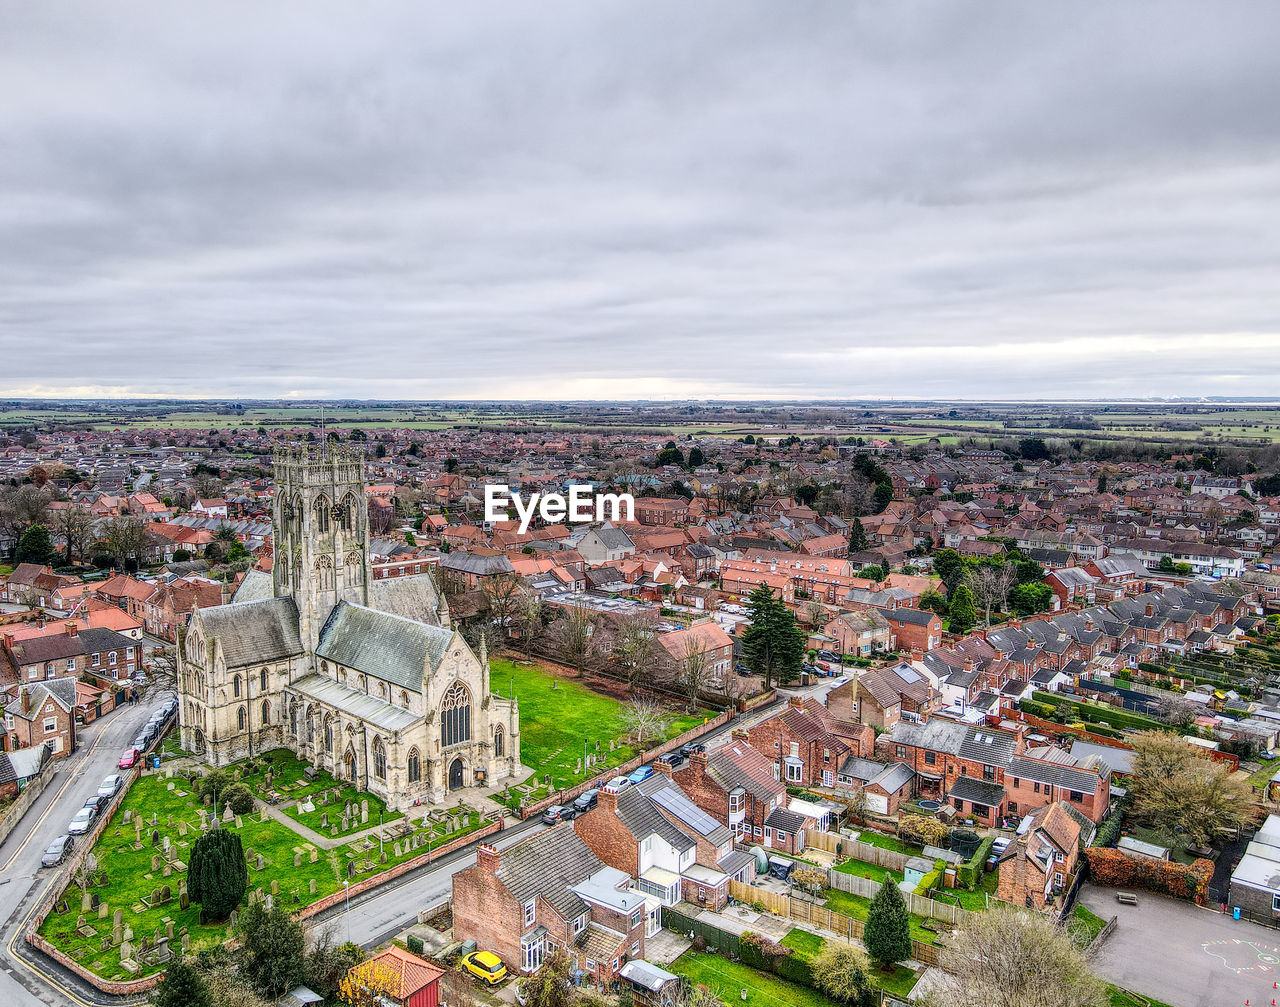 Overhead view of the town of hedon, east riding of yorkshire, uk